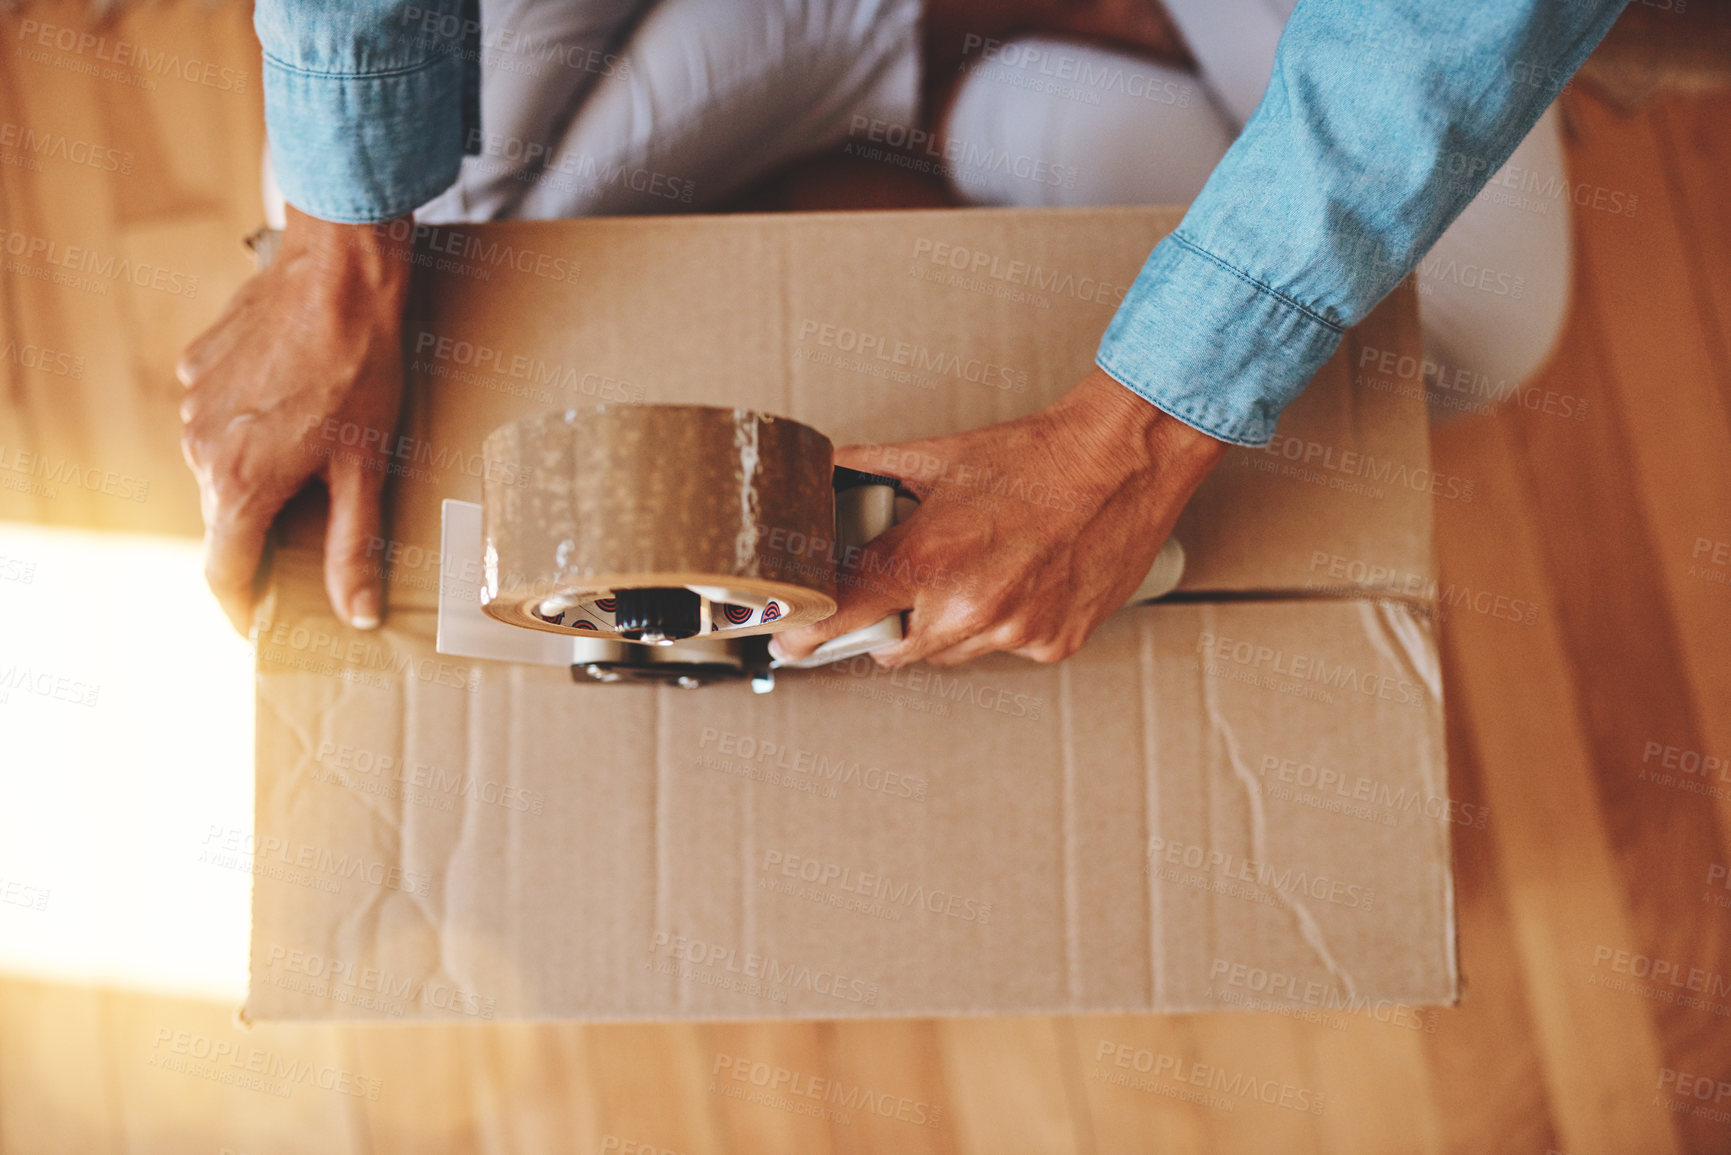 Buy stock photo Cropped shot of a woman sealing a box with adhesive tape at home